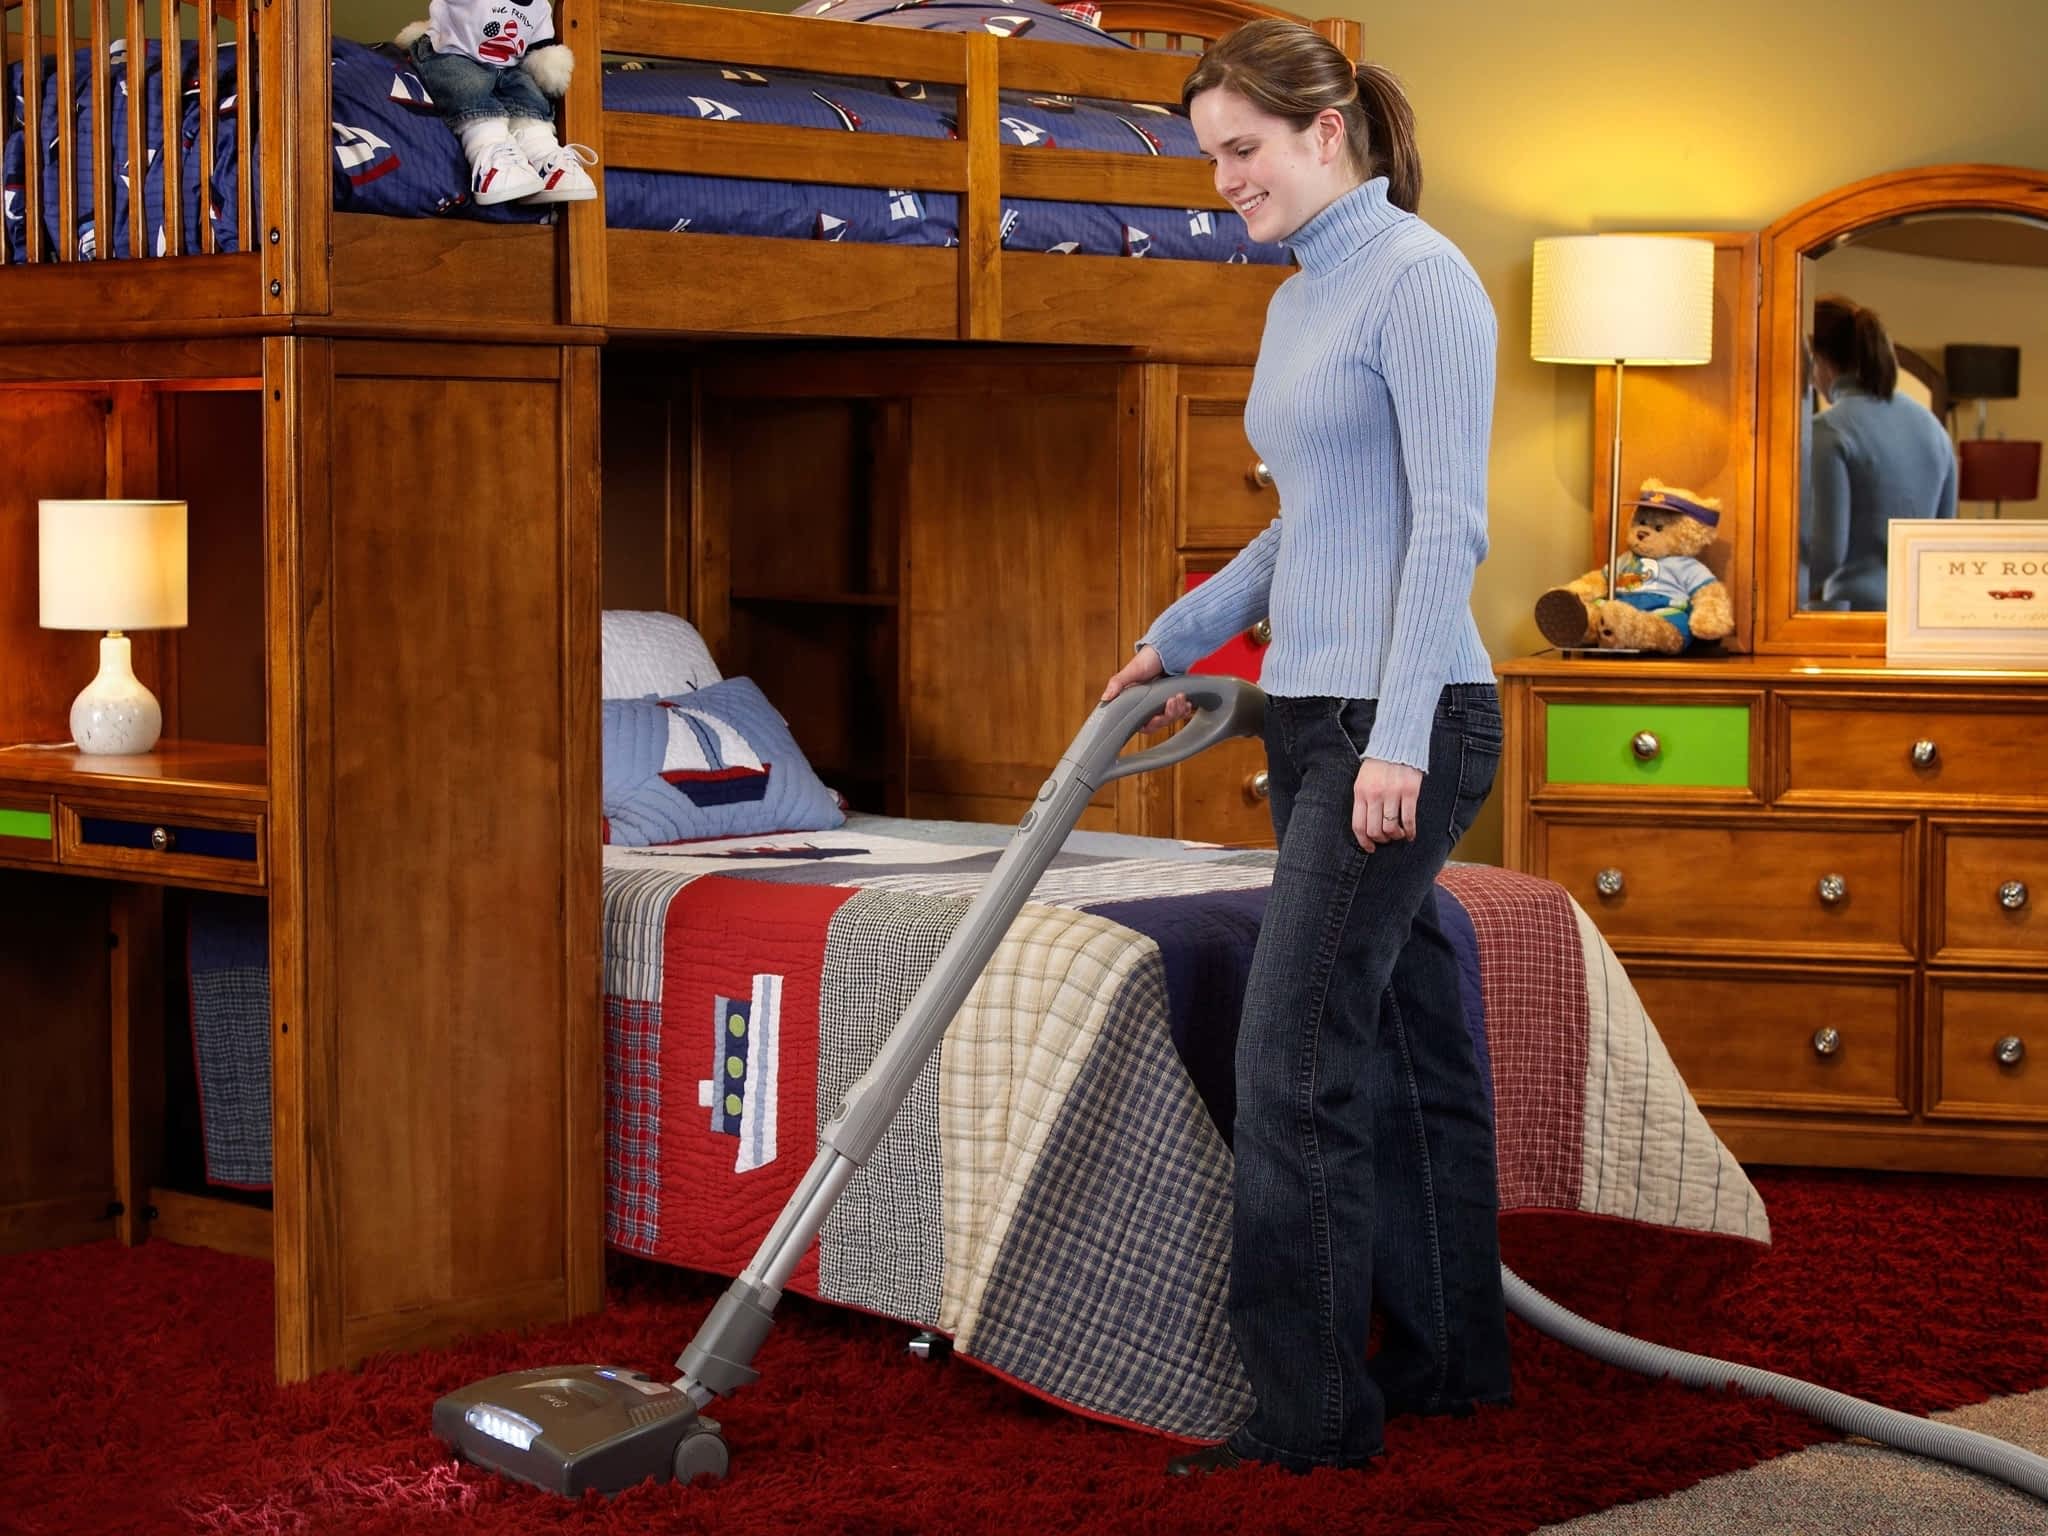 photo Island Cleaning Supplies & Vacuums